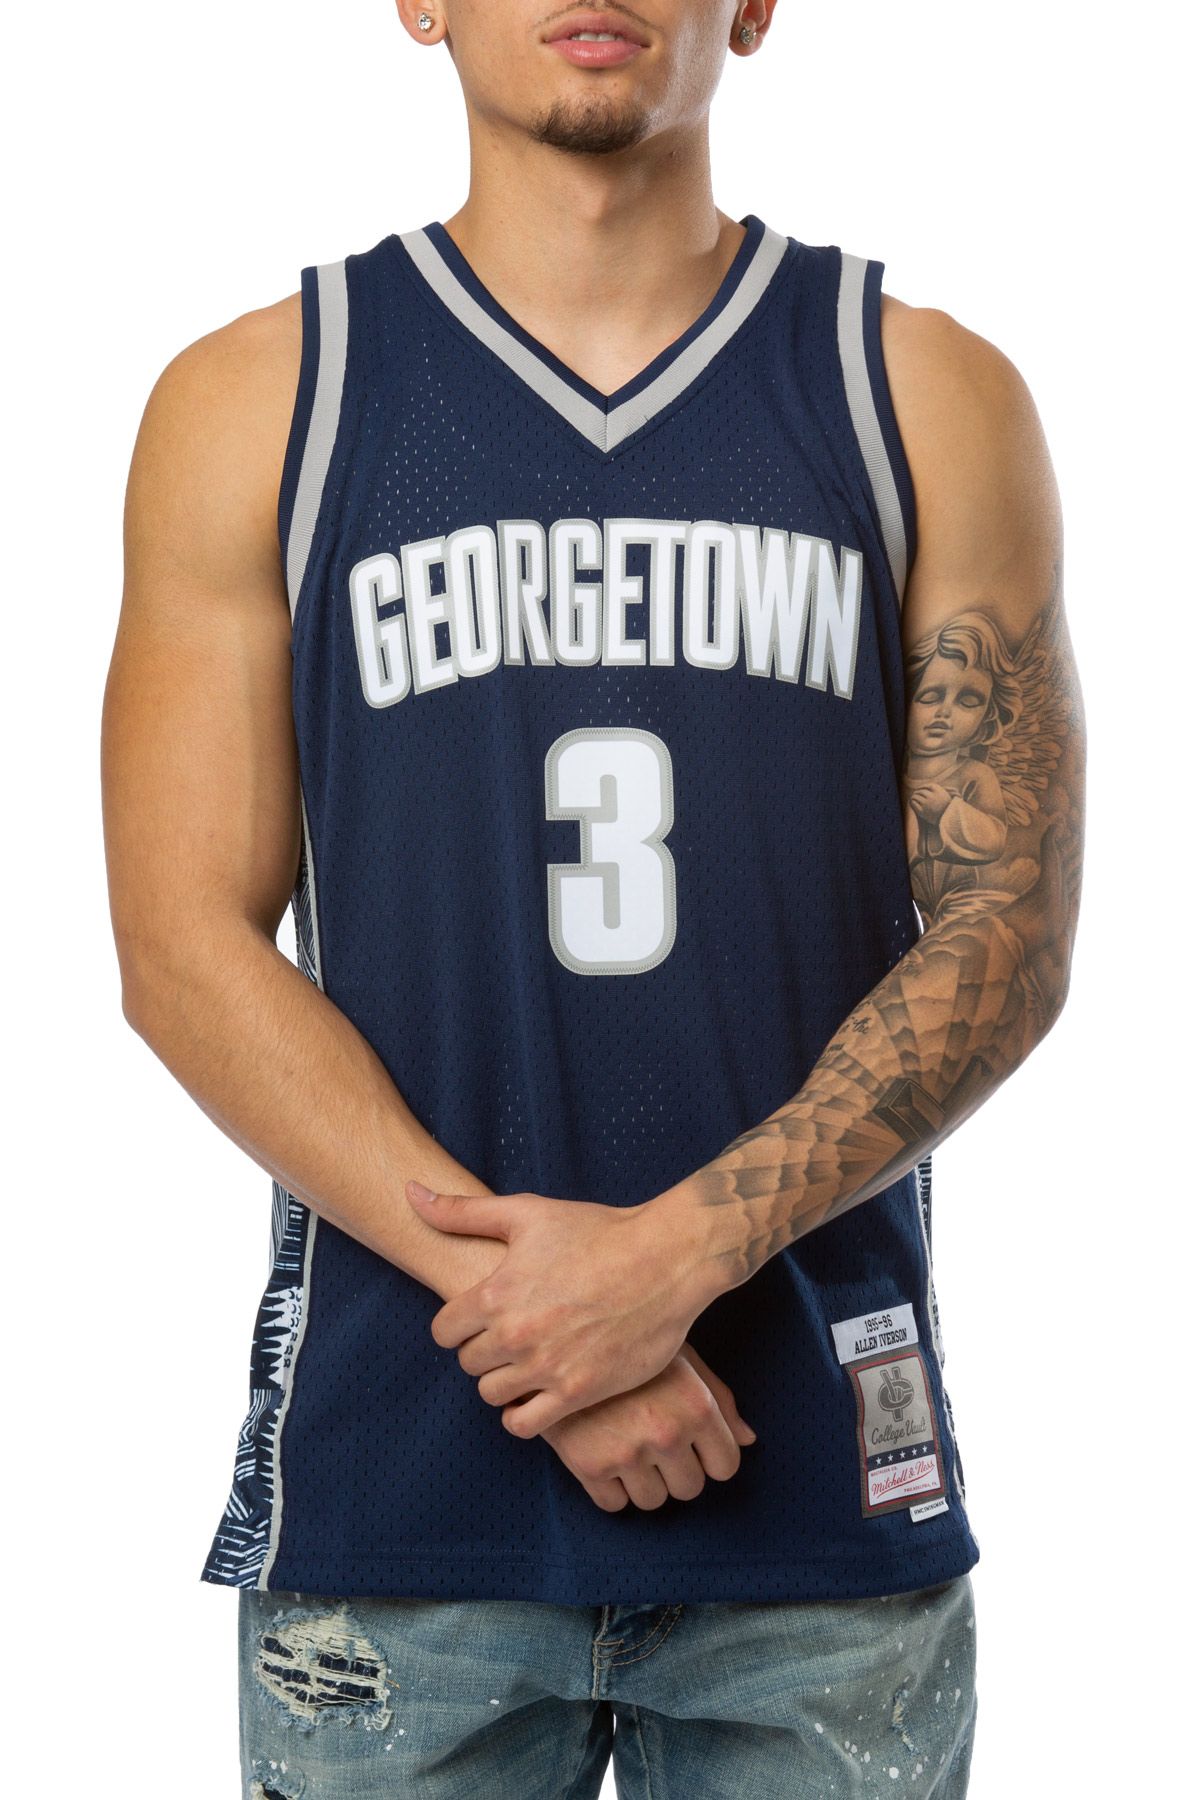 MITCHELL AND NESS GEORGETOWN 1995 ALLEN IVERSON JERSEY  SMJY4845-GTW95AIVGYNY - Shiekh